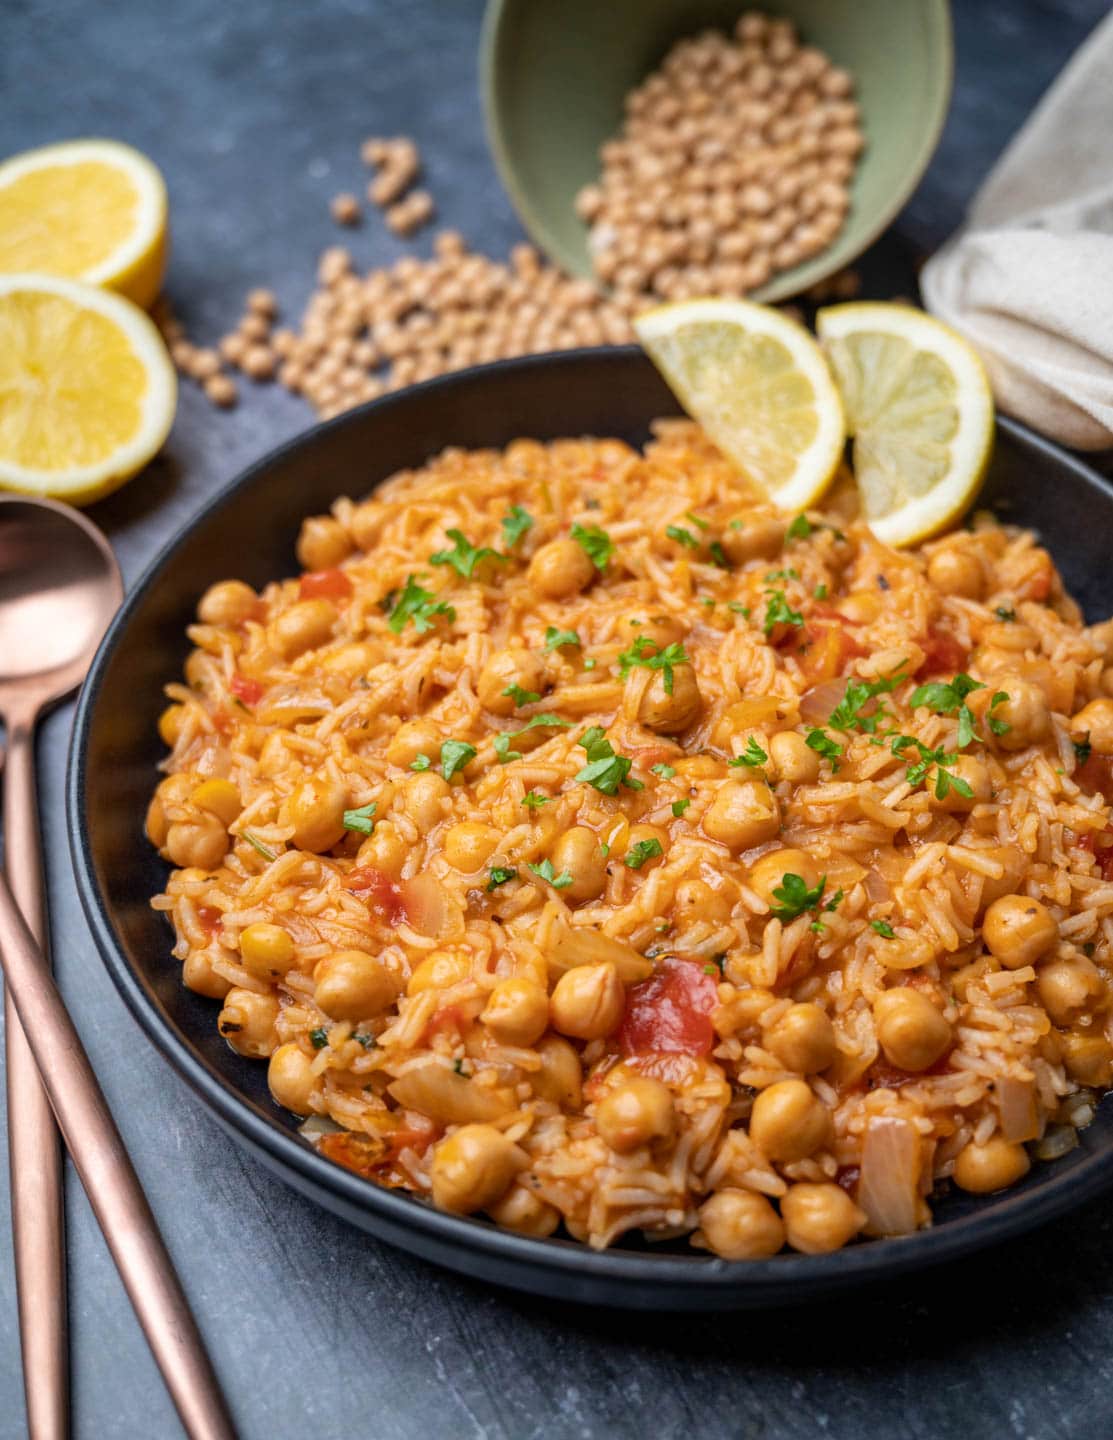 a plate of Spanish chickpeas and rice